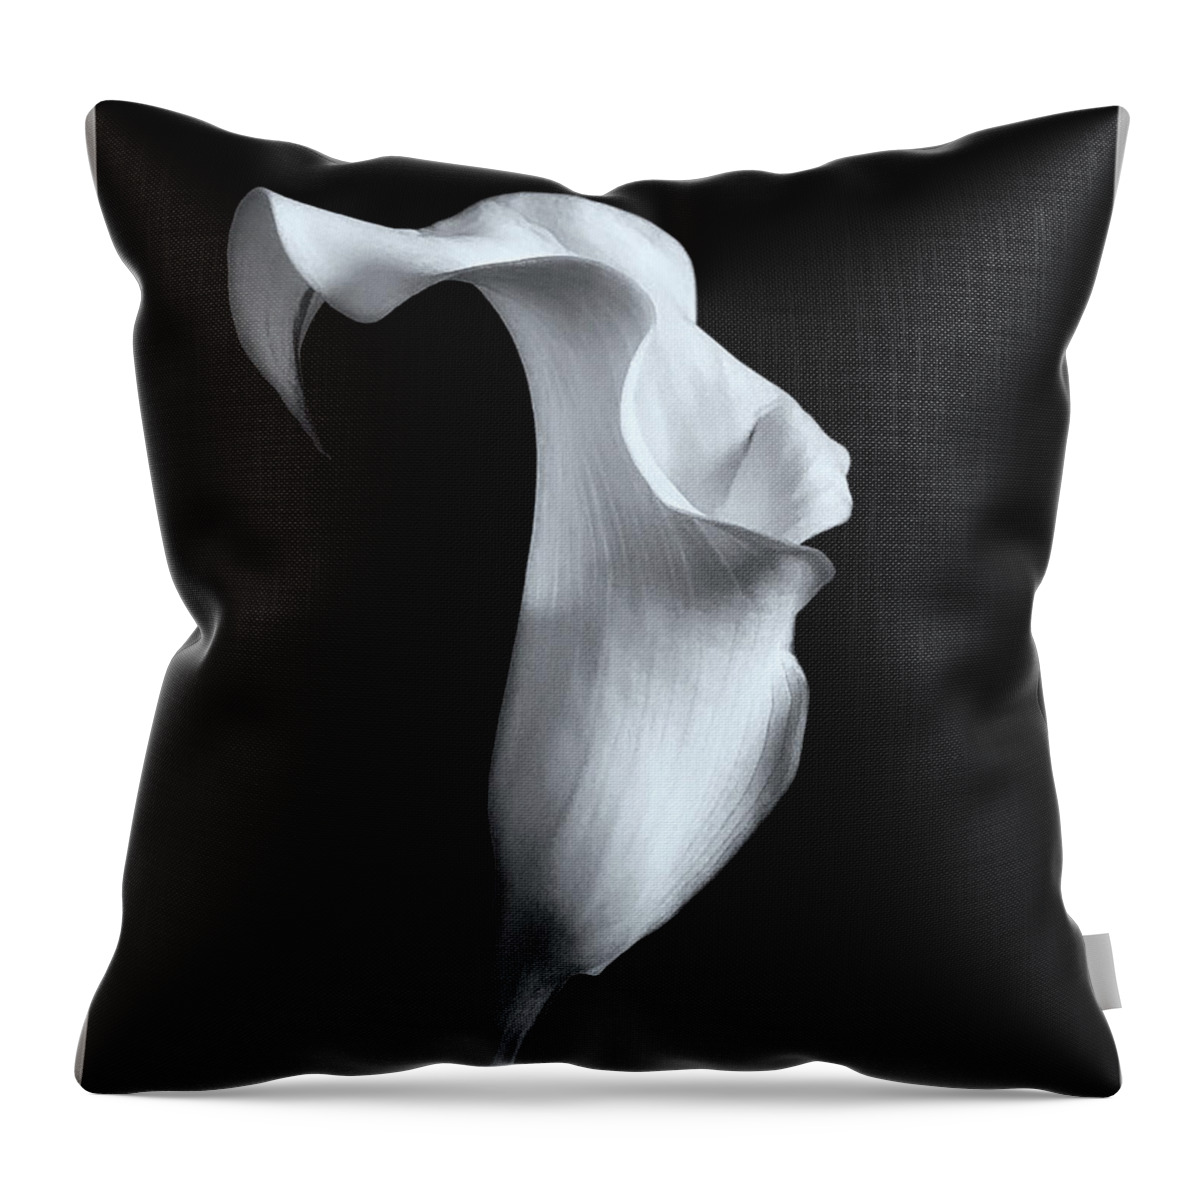 Flower Throw Pillow featuring the photograph Dancing Lily by Barbara Zahno